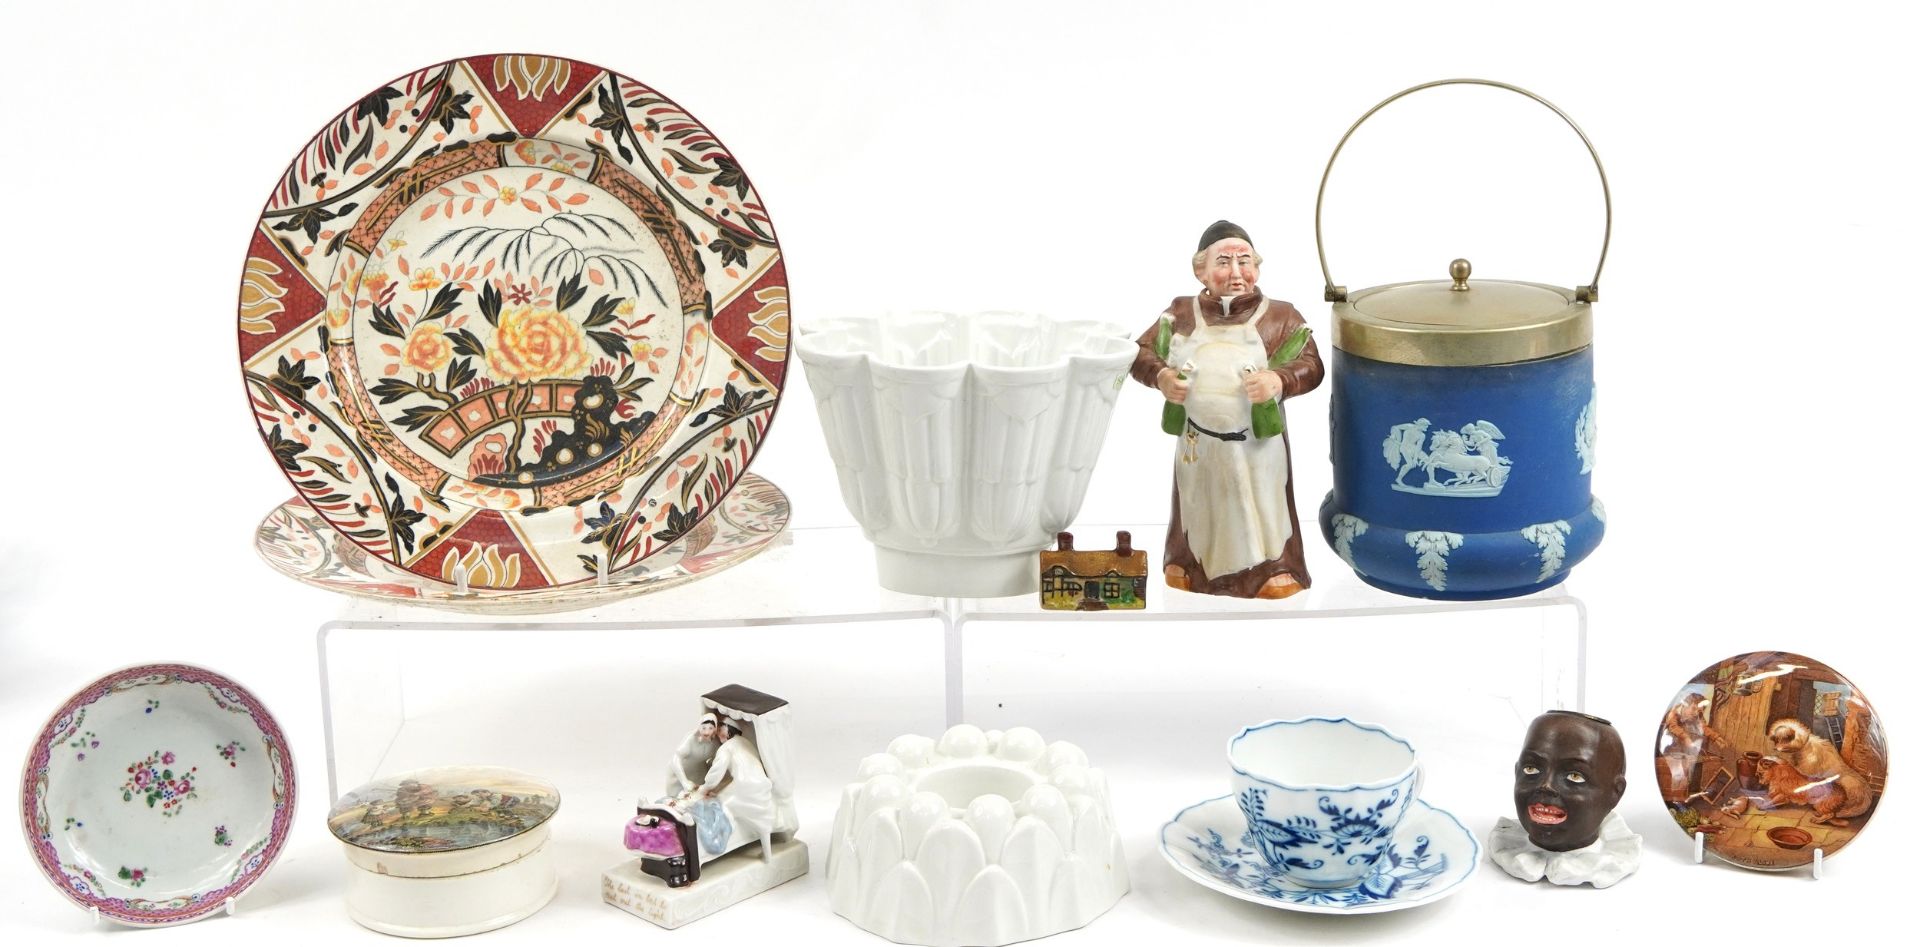 19th century and later ceramics including Meissen cup and saucer, Newhall dish, Prattware pot